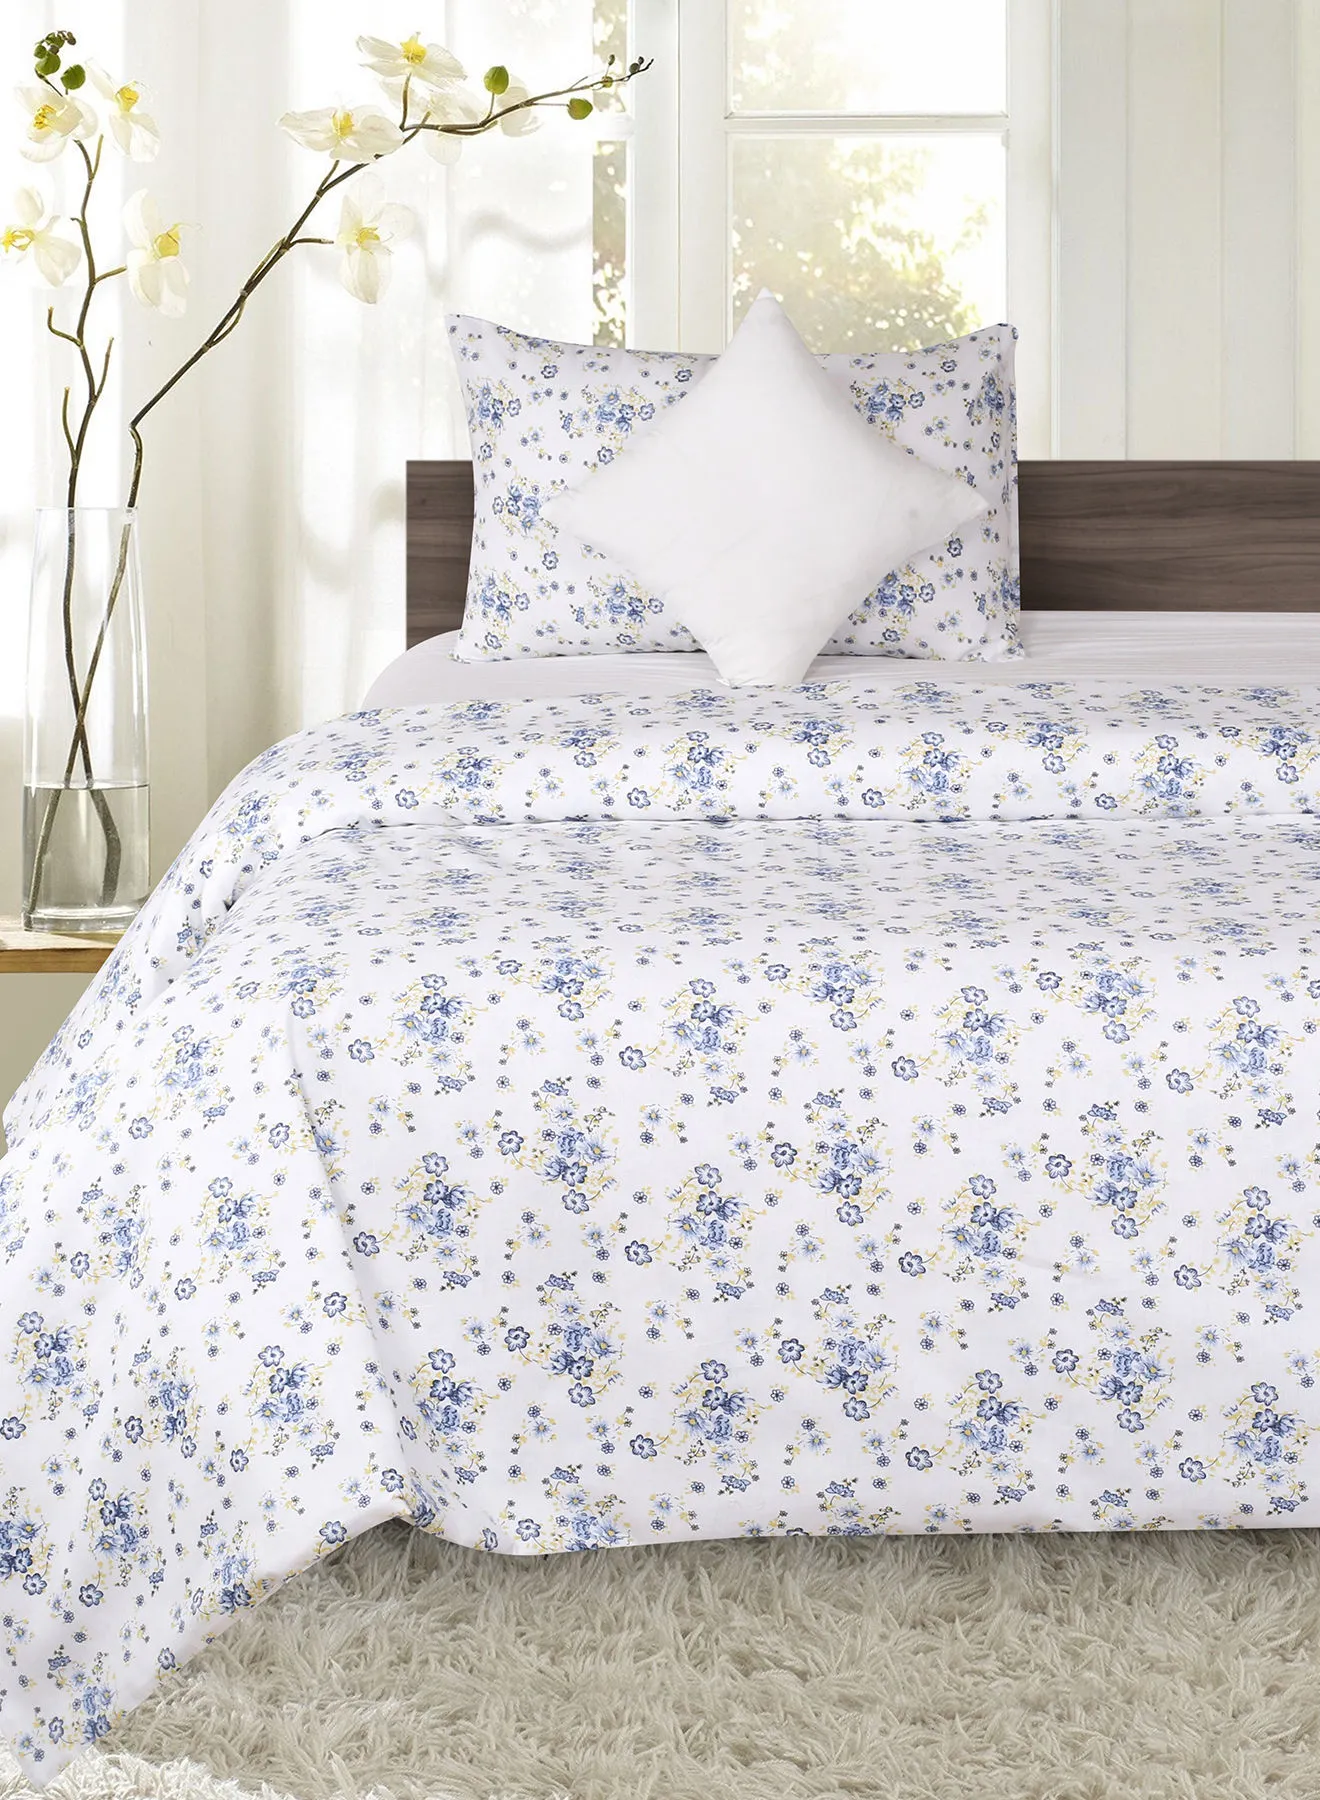 Amal Duvet Cover - With Pillow Cover 50X75 Cm, Comforter 150X200 Cm, 40X40 - For Twin Size Mattress - White/Blue 100% Cotton